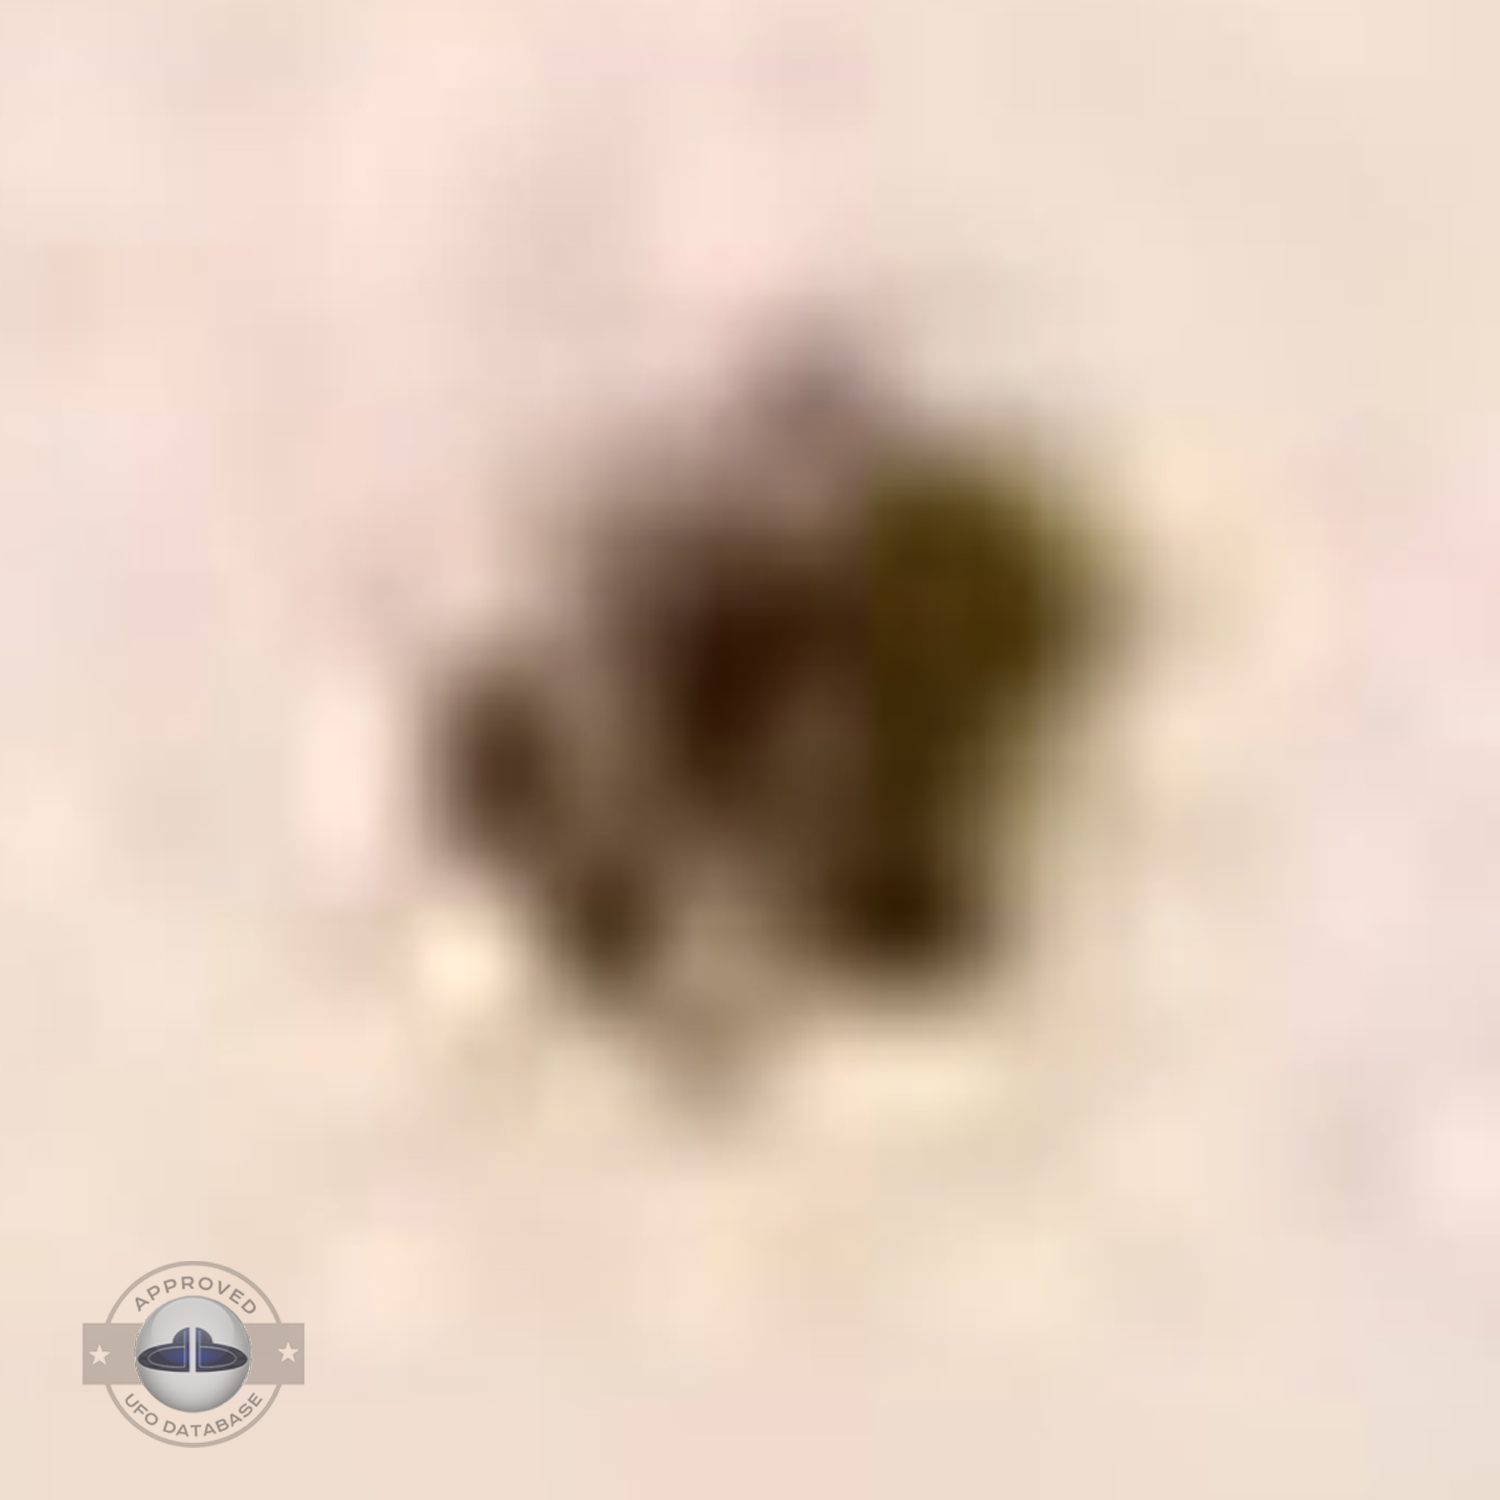 UFO Picture - UFO Sighting over Great Lake Michigan - October 1979 UFO Picture #91-5